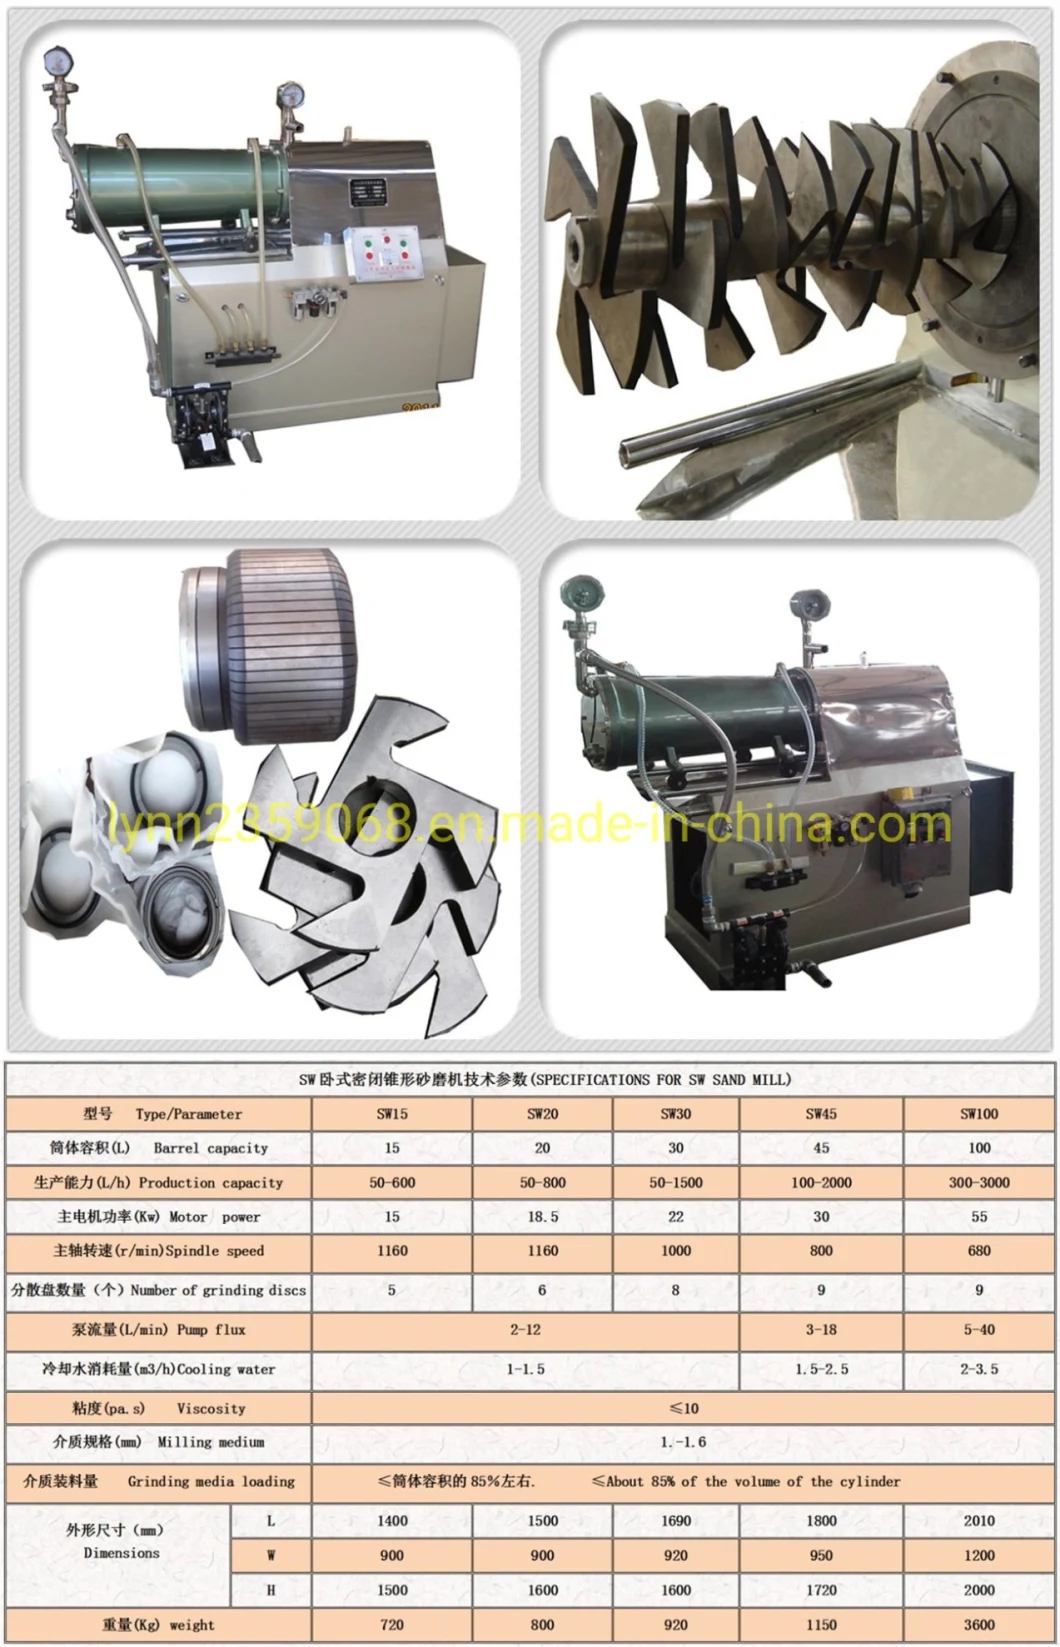 Longxing Disc Type Bar Type Turbine Type Horizontal Sand Mill for Ink Coating Pesticides Grinding